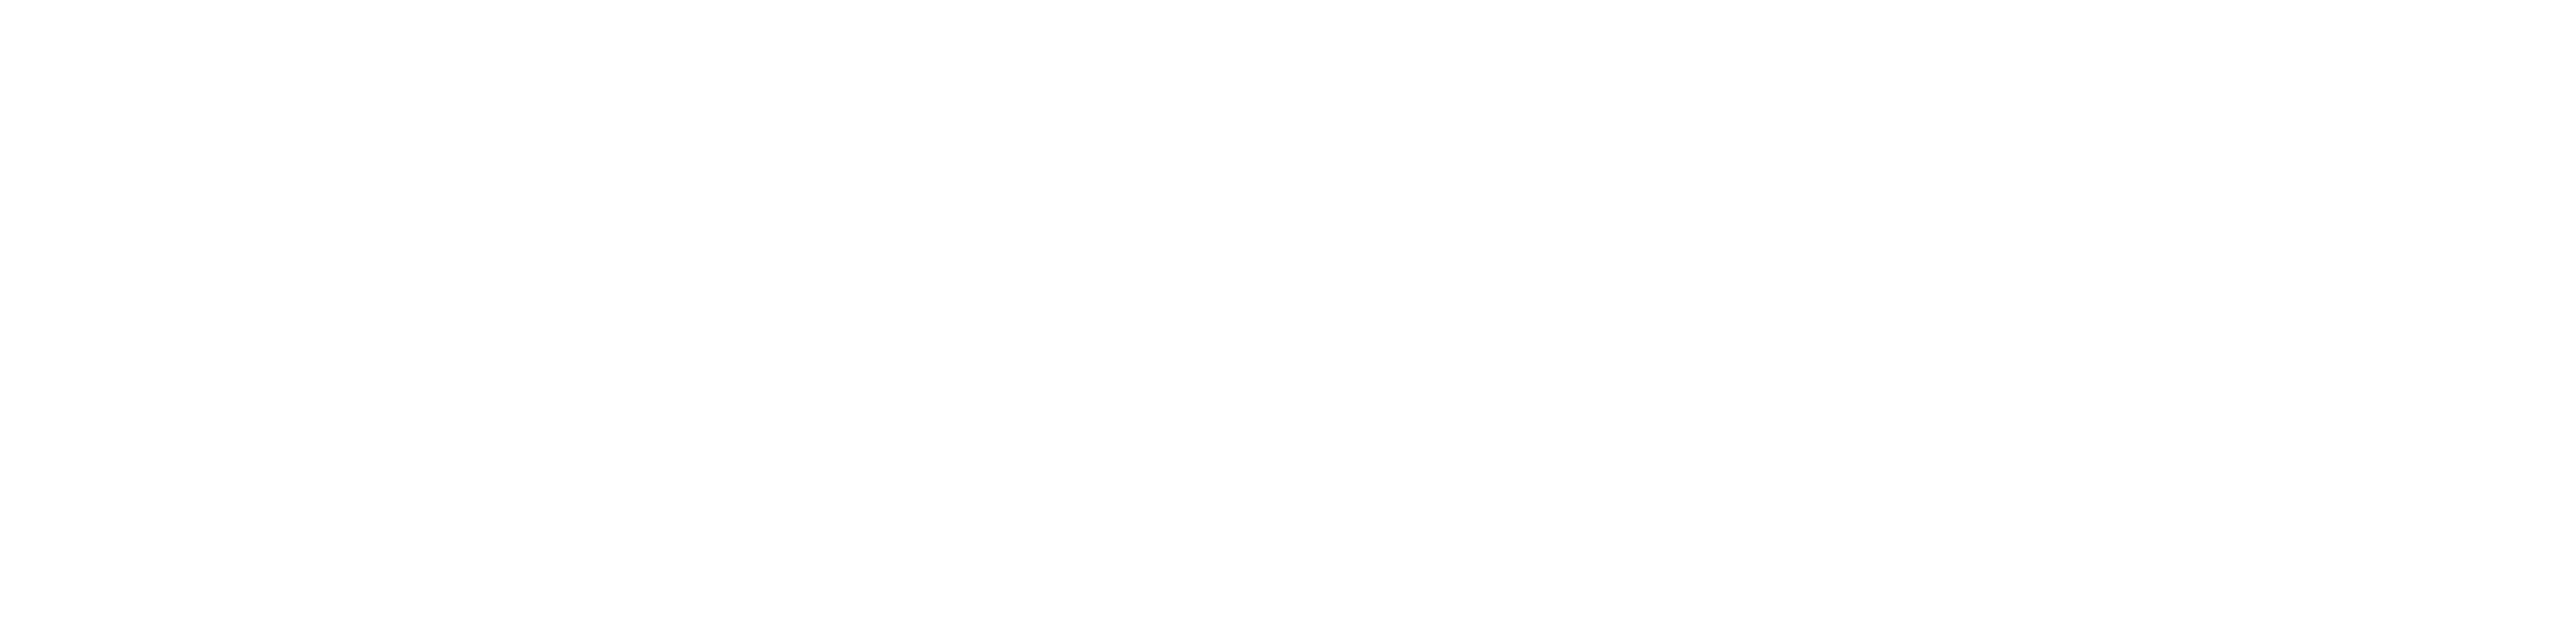 Metrologie Concepts Solutions